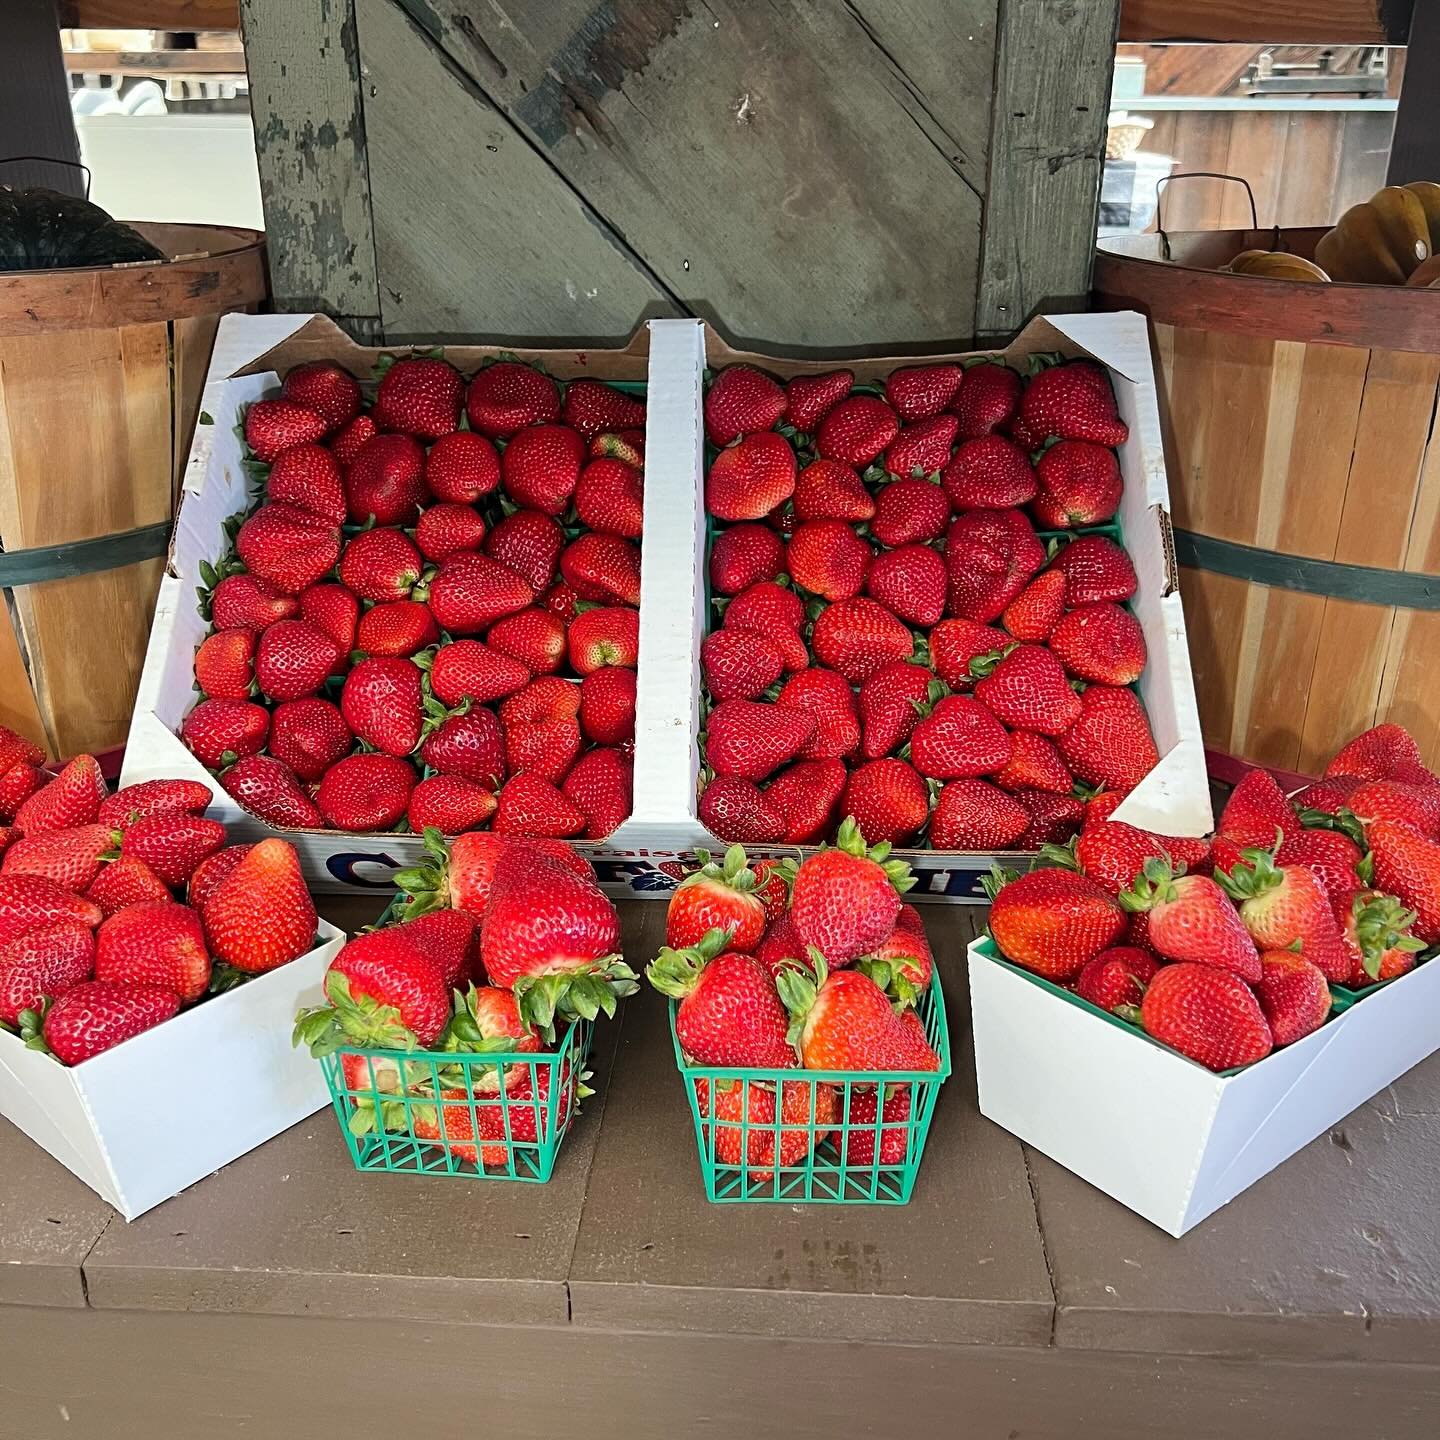 Product Announcement!  Berry season is here and we are so excited to have fresh strawberries from Watsonville in stock.